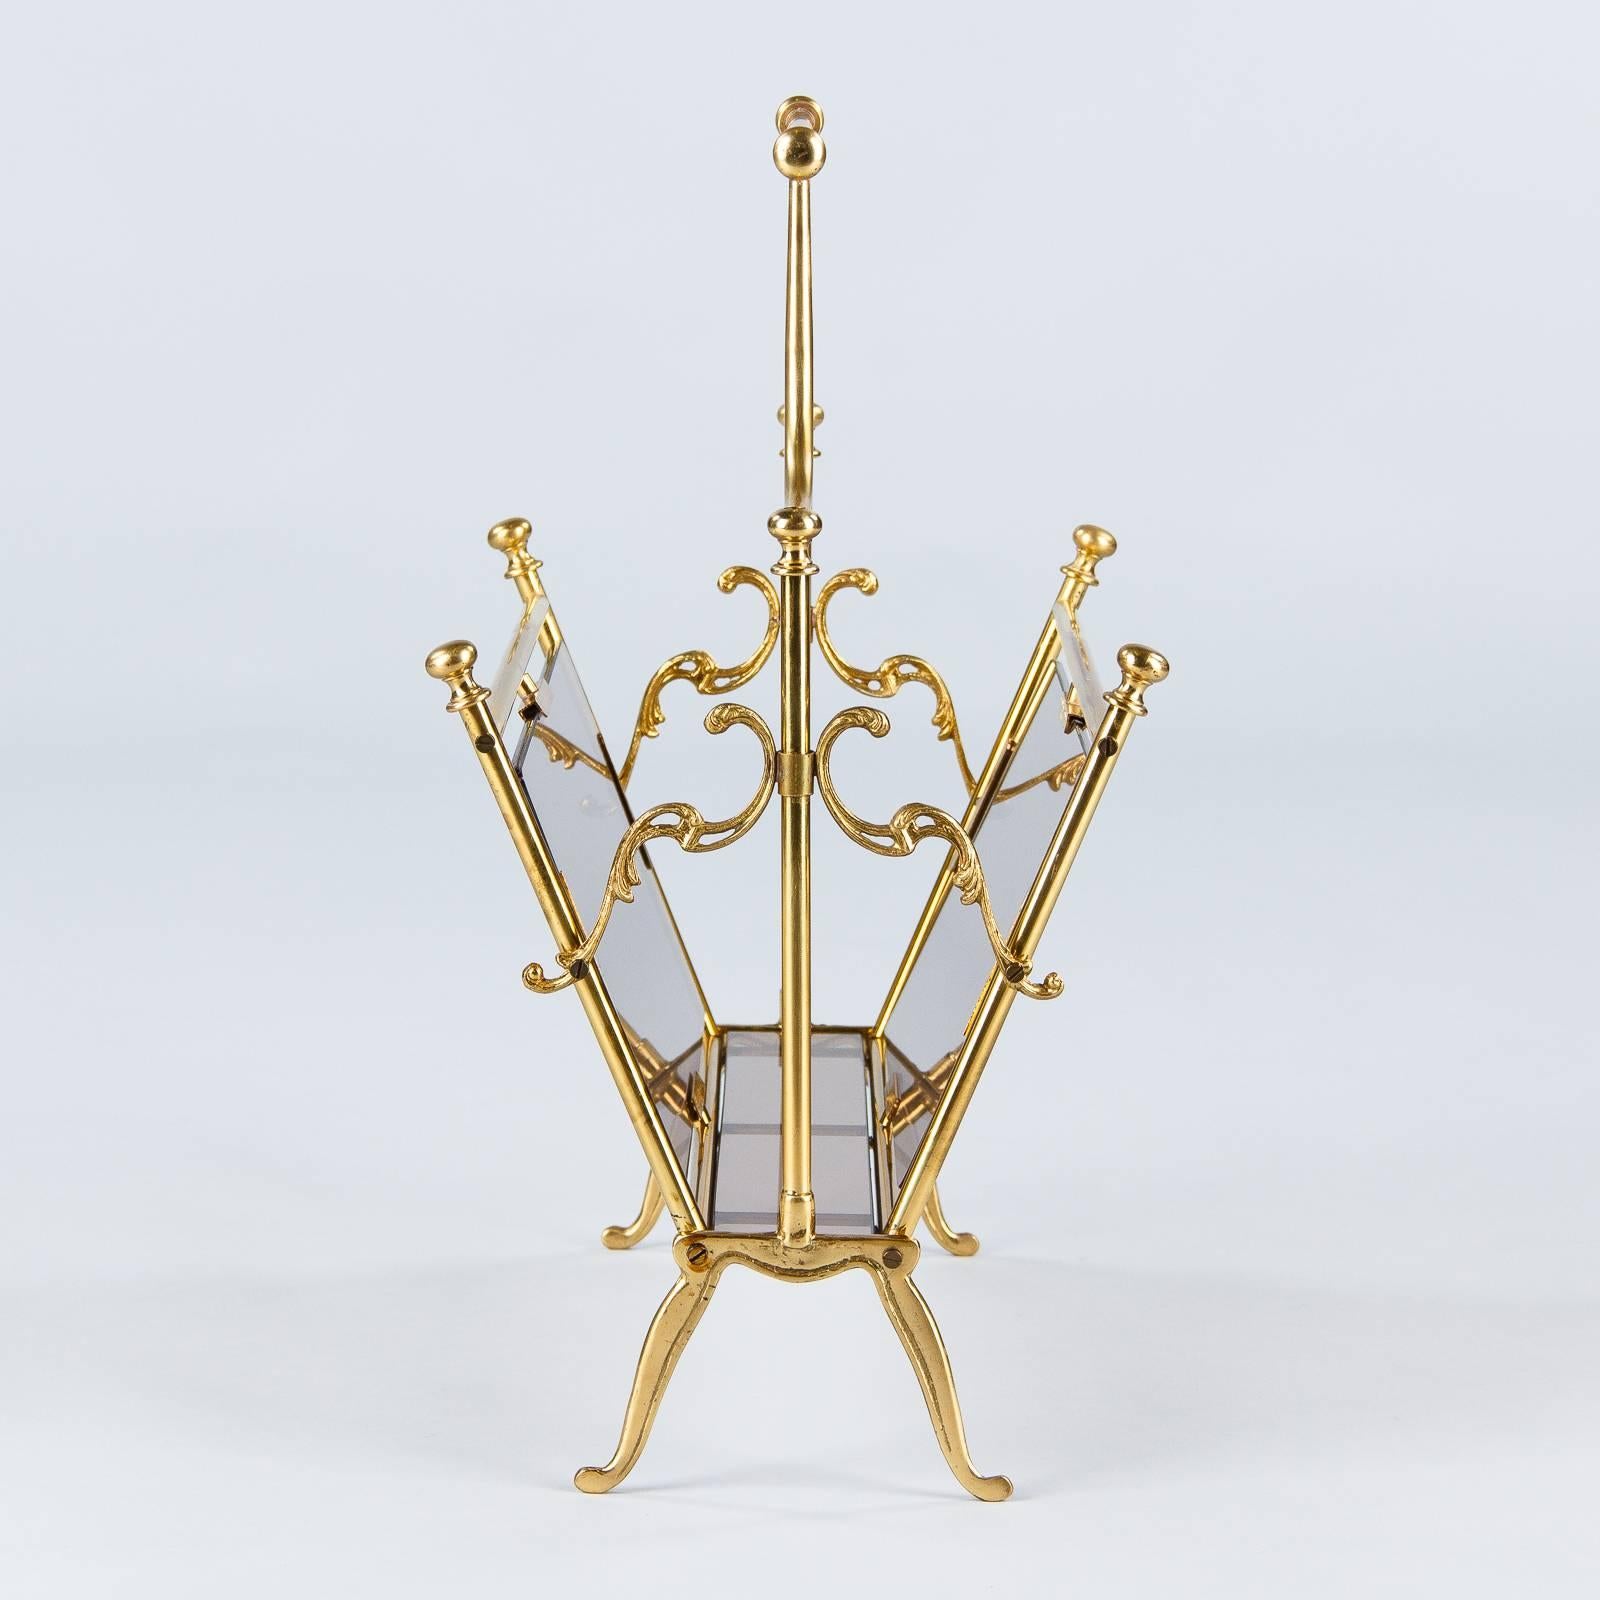 A 1950s magazine holder made of polished brass and smoked glass. Brass rods with round finial tops form the frame, which rest on slightly curved, tapered legs with incised decoration. Flourish shaped brass pieces with pierced detailing join the